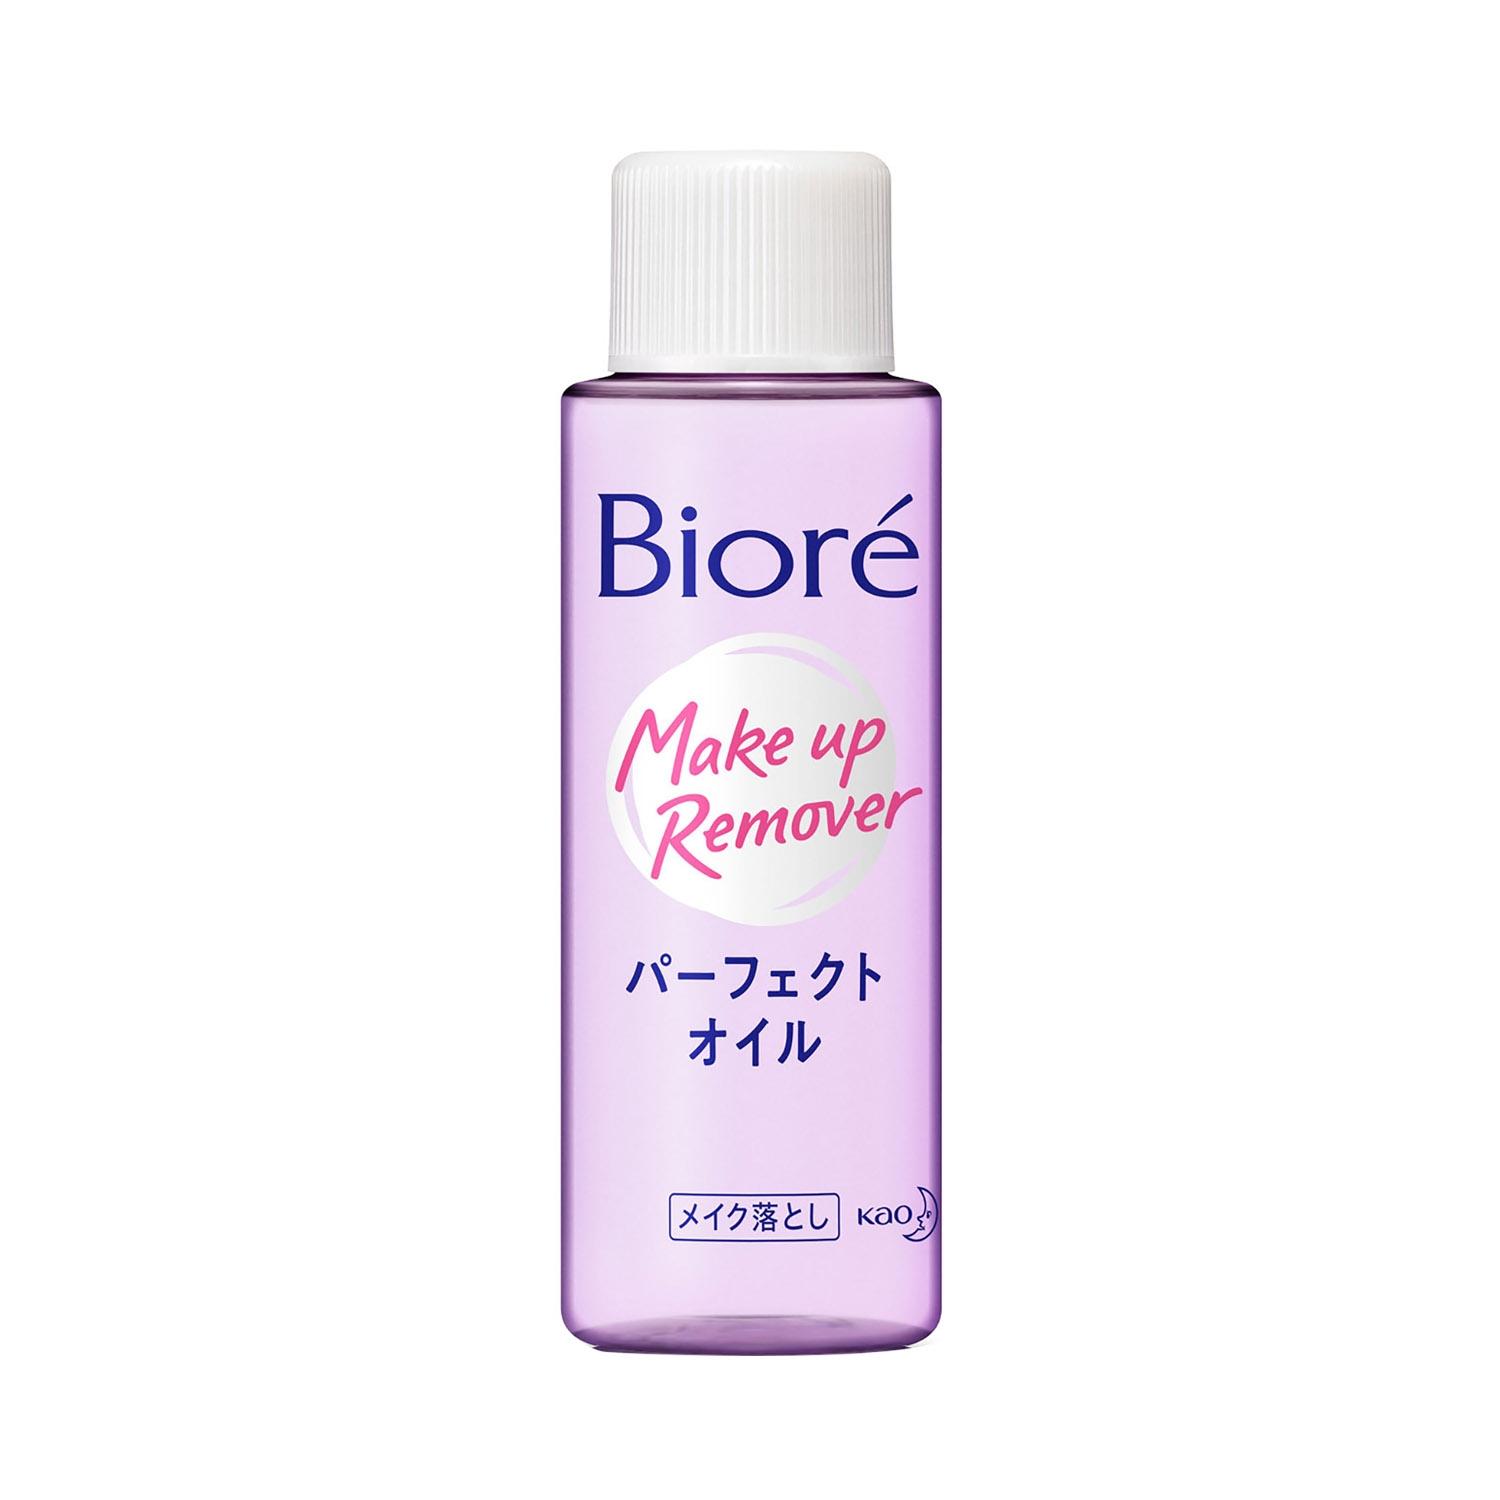 biore makeup remover cleansing oil (50ml)